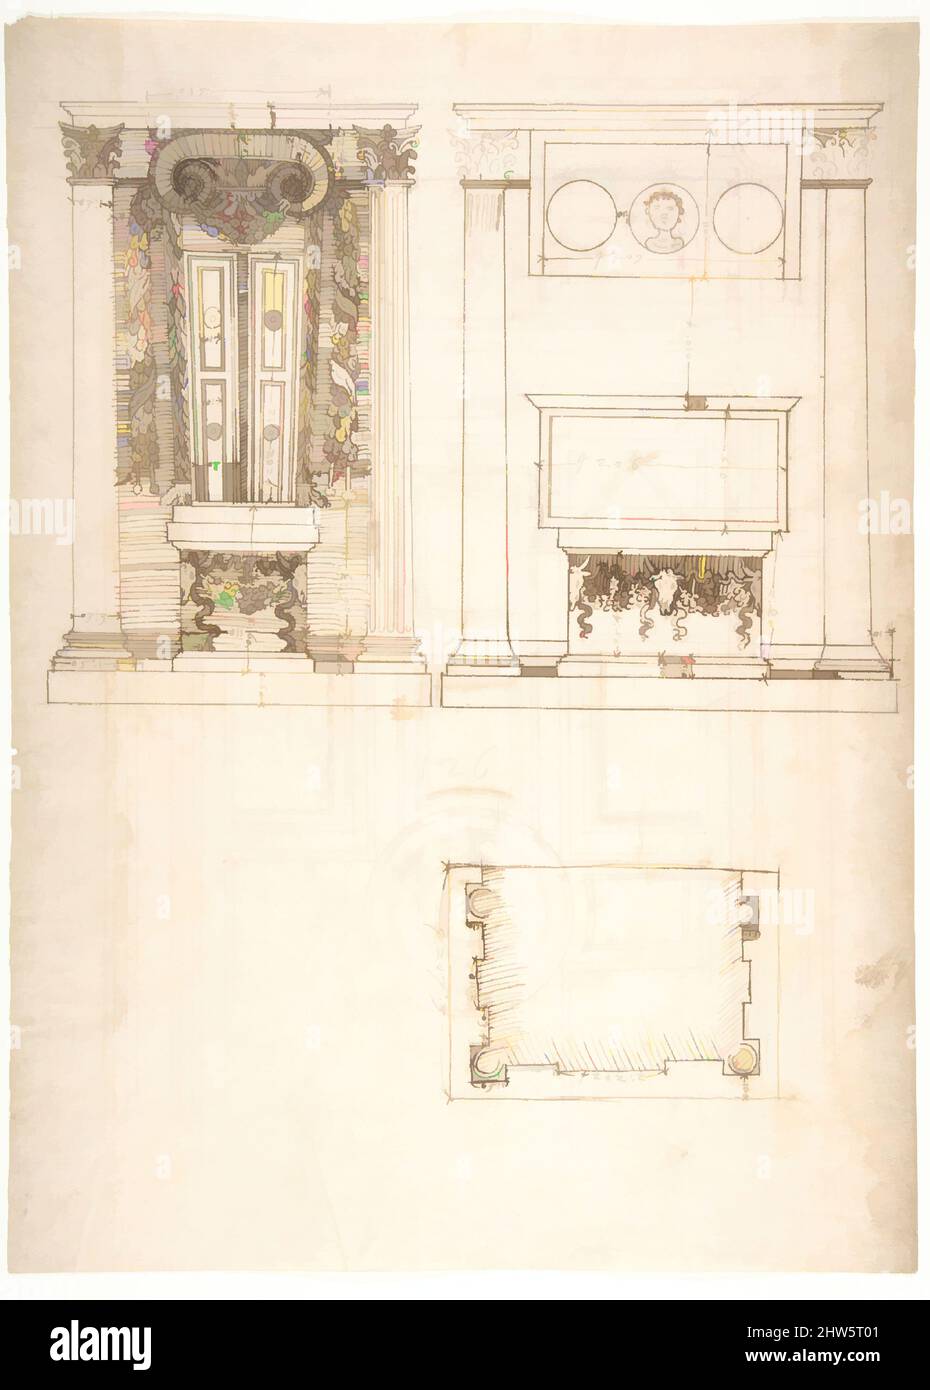 Art inspired by Unidentified, funerary altar, plan and elevations (recto) S. Giovanni Laterano, Oratorio della Santa Croce, paneling, elevation (verso), early to mid-16th century, Dark brown ink, black chalk, and incised lines, sheet: 15 3/8 x 11 1/8 in. (39 x 28.3 cm, Classic works modernized by Artotop with a splash of modernity. Shapes, color and value, eye-catching visual impact on art. Emotions through freedom of artworks in a contemporary way. A timeless message pursuing a wildly creative new direction. Artists turning to the digital medium and creating the Artotop NFT Stock Photo